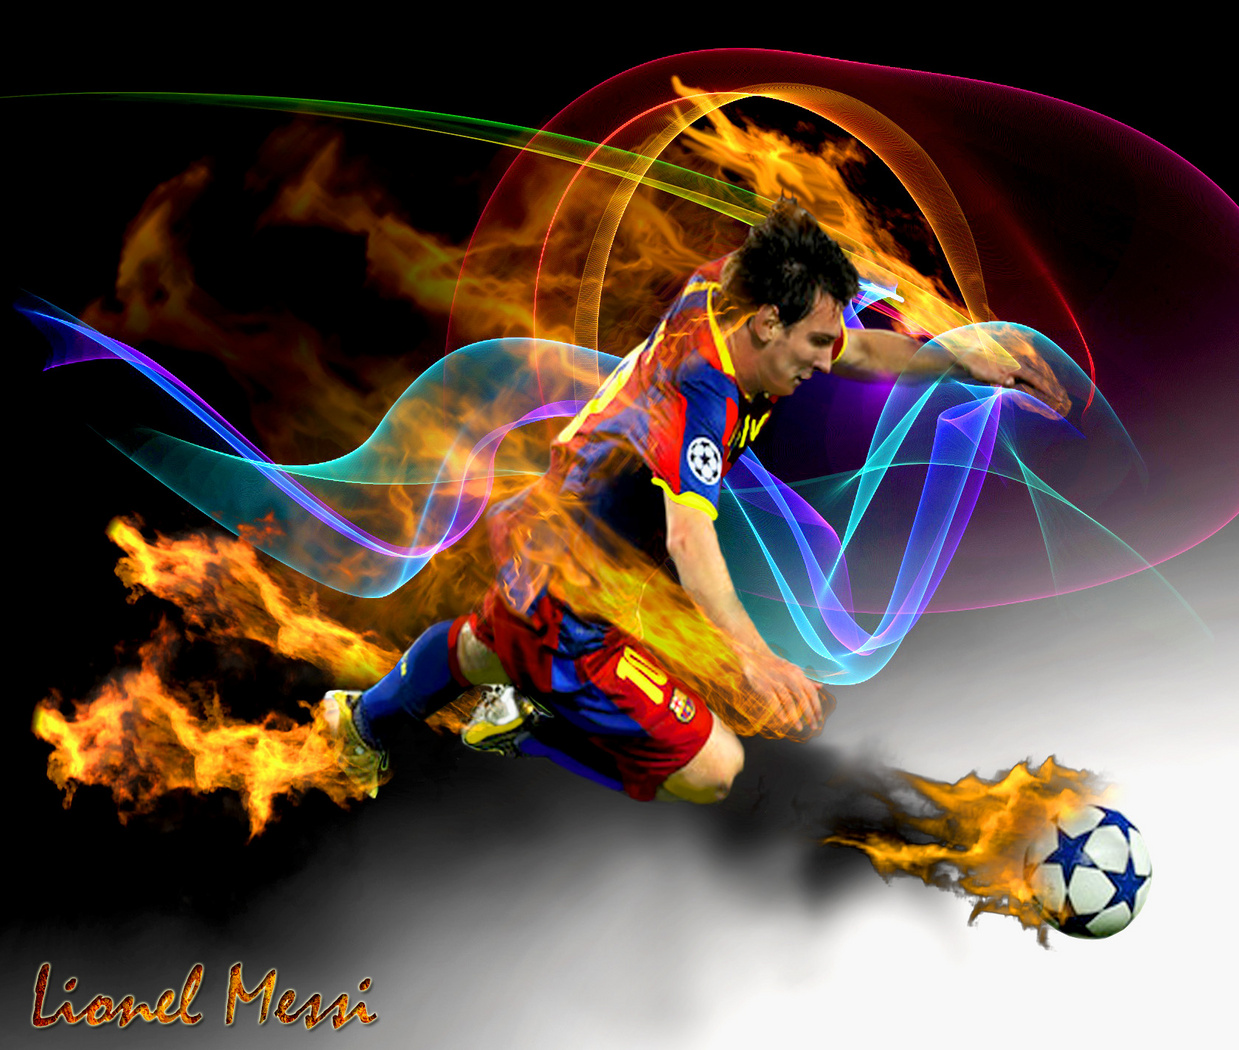 All Wallpapers Lionel Messi hd New Nice Wallpapers 2013 1239x1050